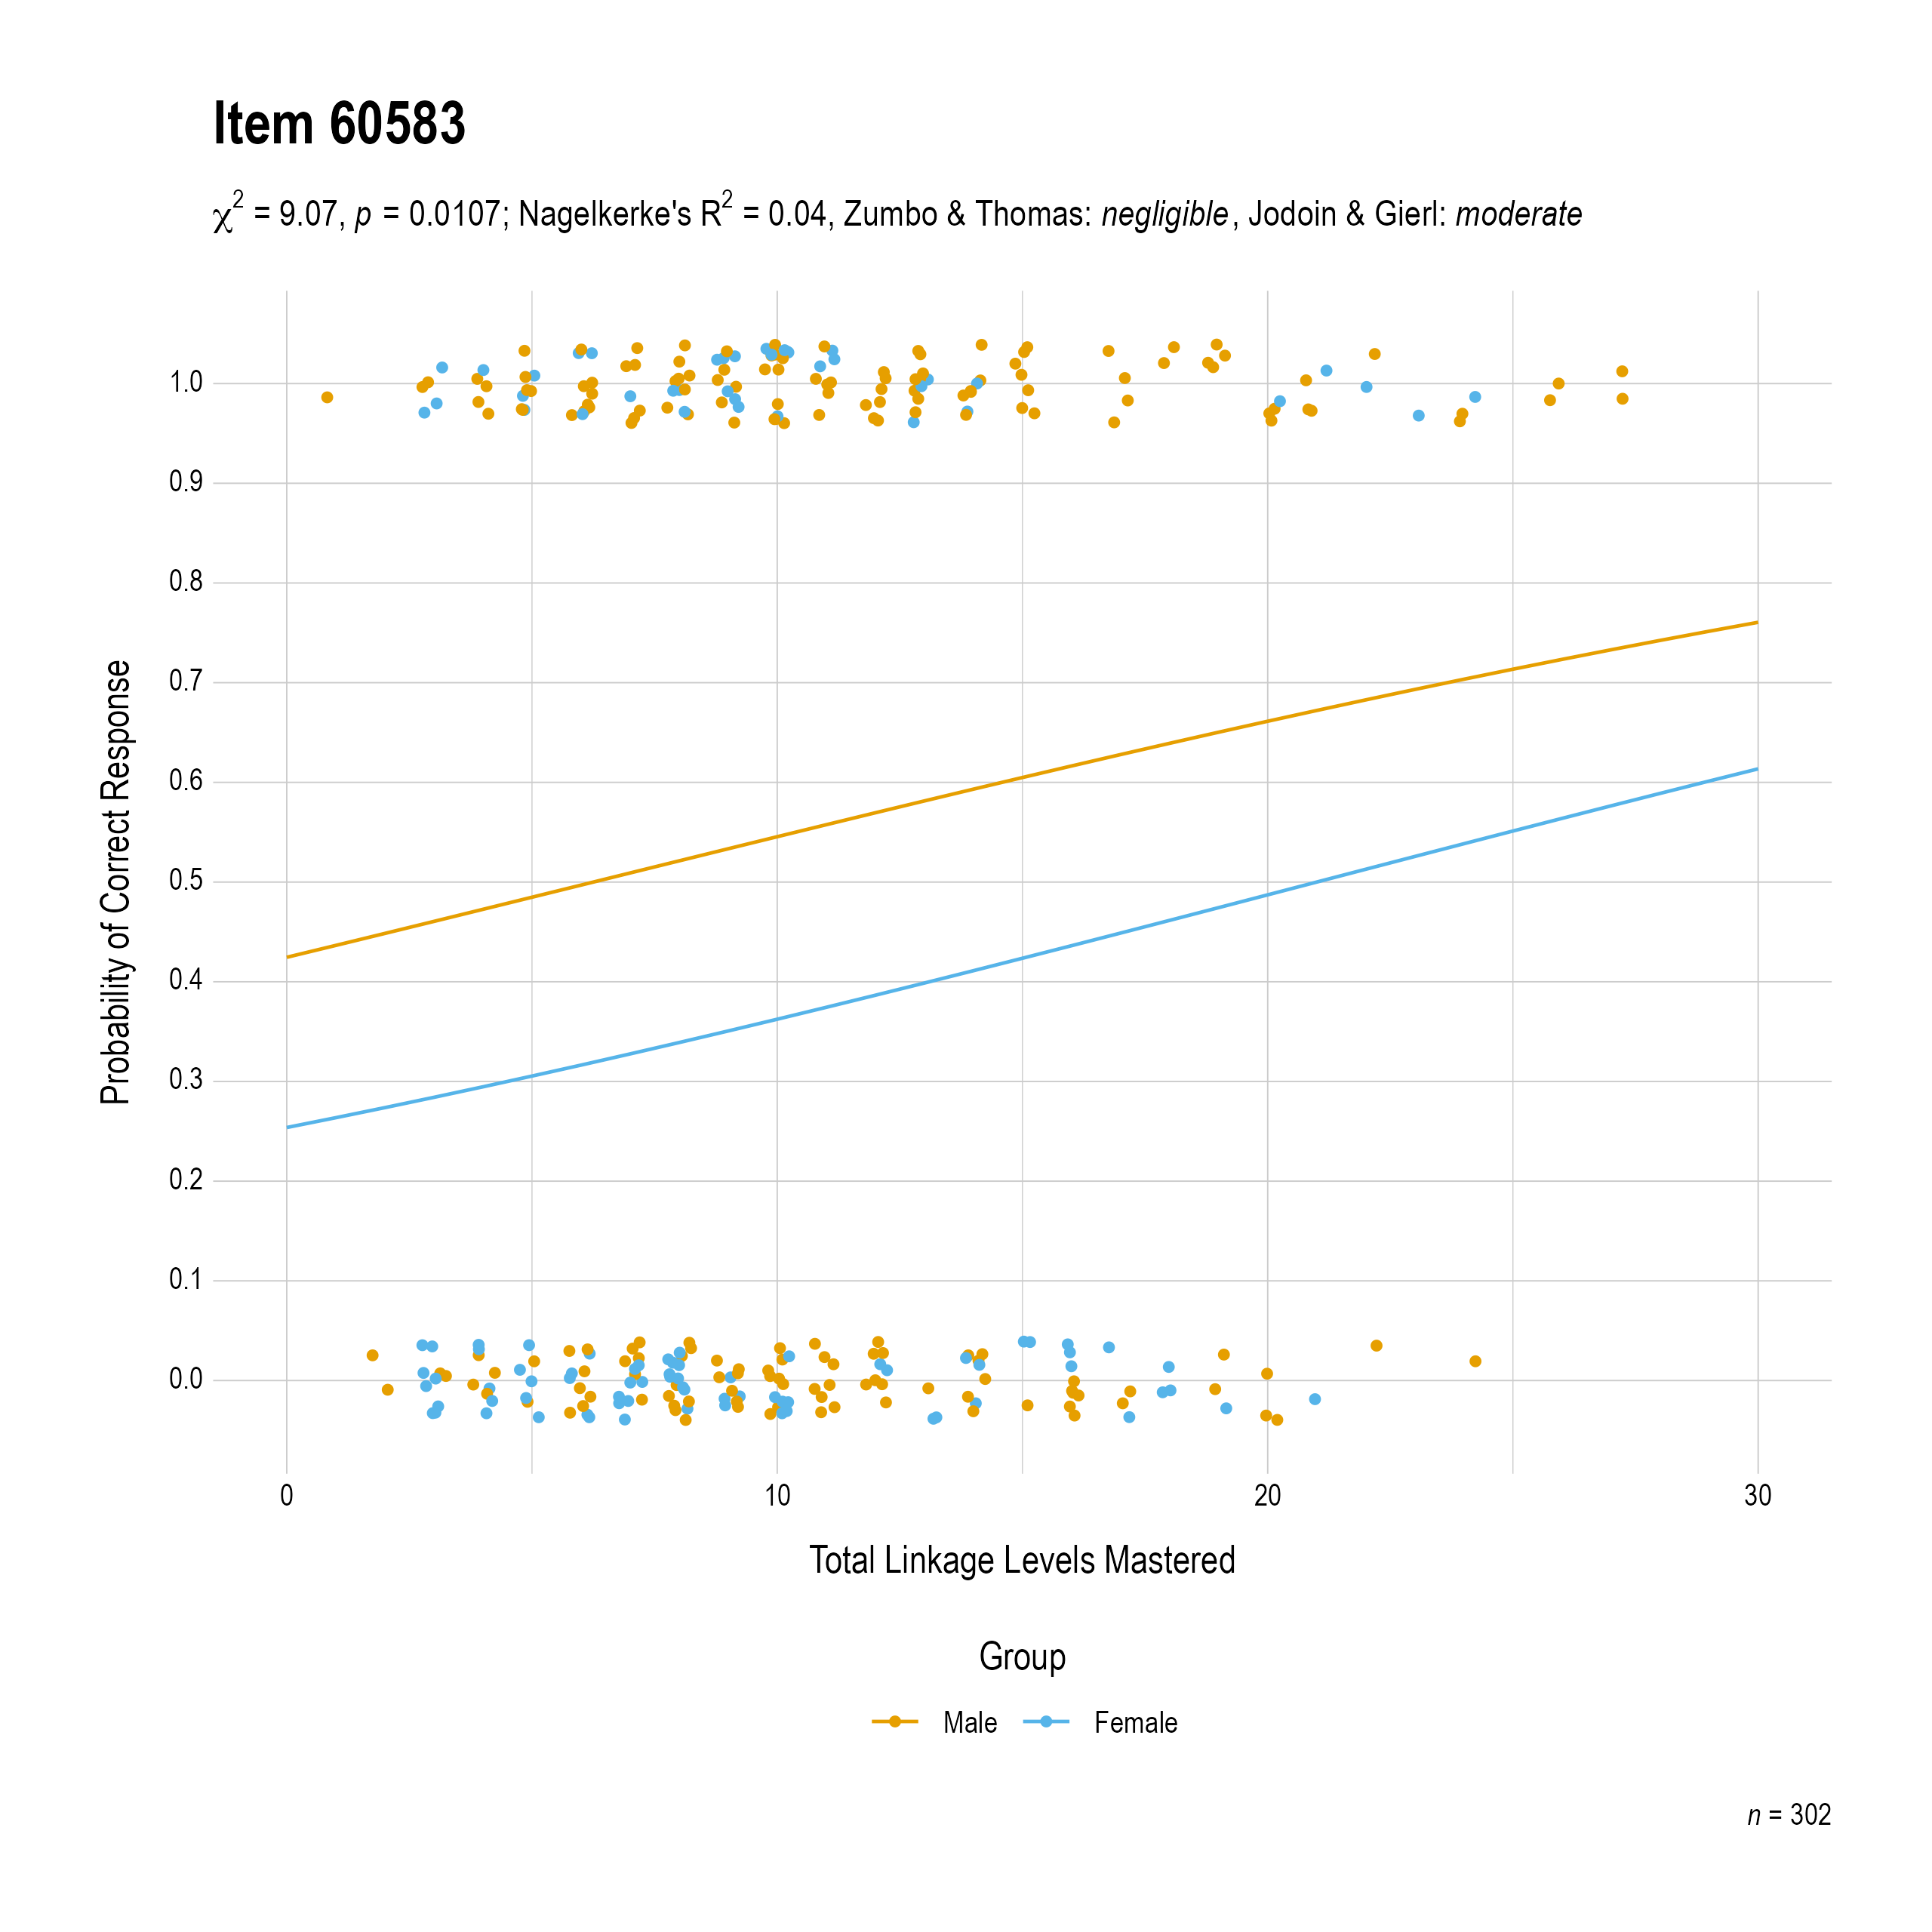 The plot of the combined gender differential item function evidence for Mathematics item 60583. The figure contains points shaded by group. The figure also contains a logistic regression curve for each group. The total linkage levels mastered in is on the x-axis, and the probability of a correct response is on the y-axis.